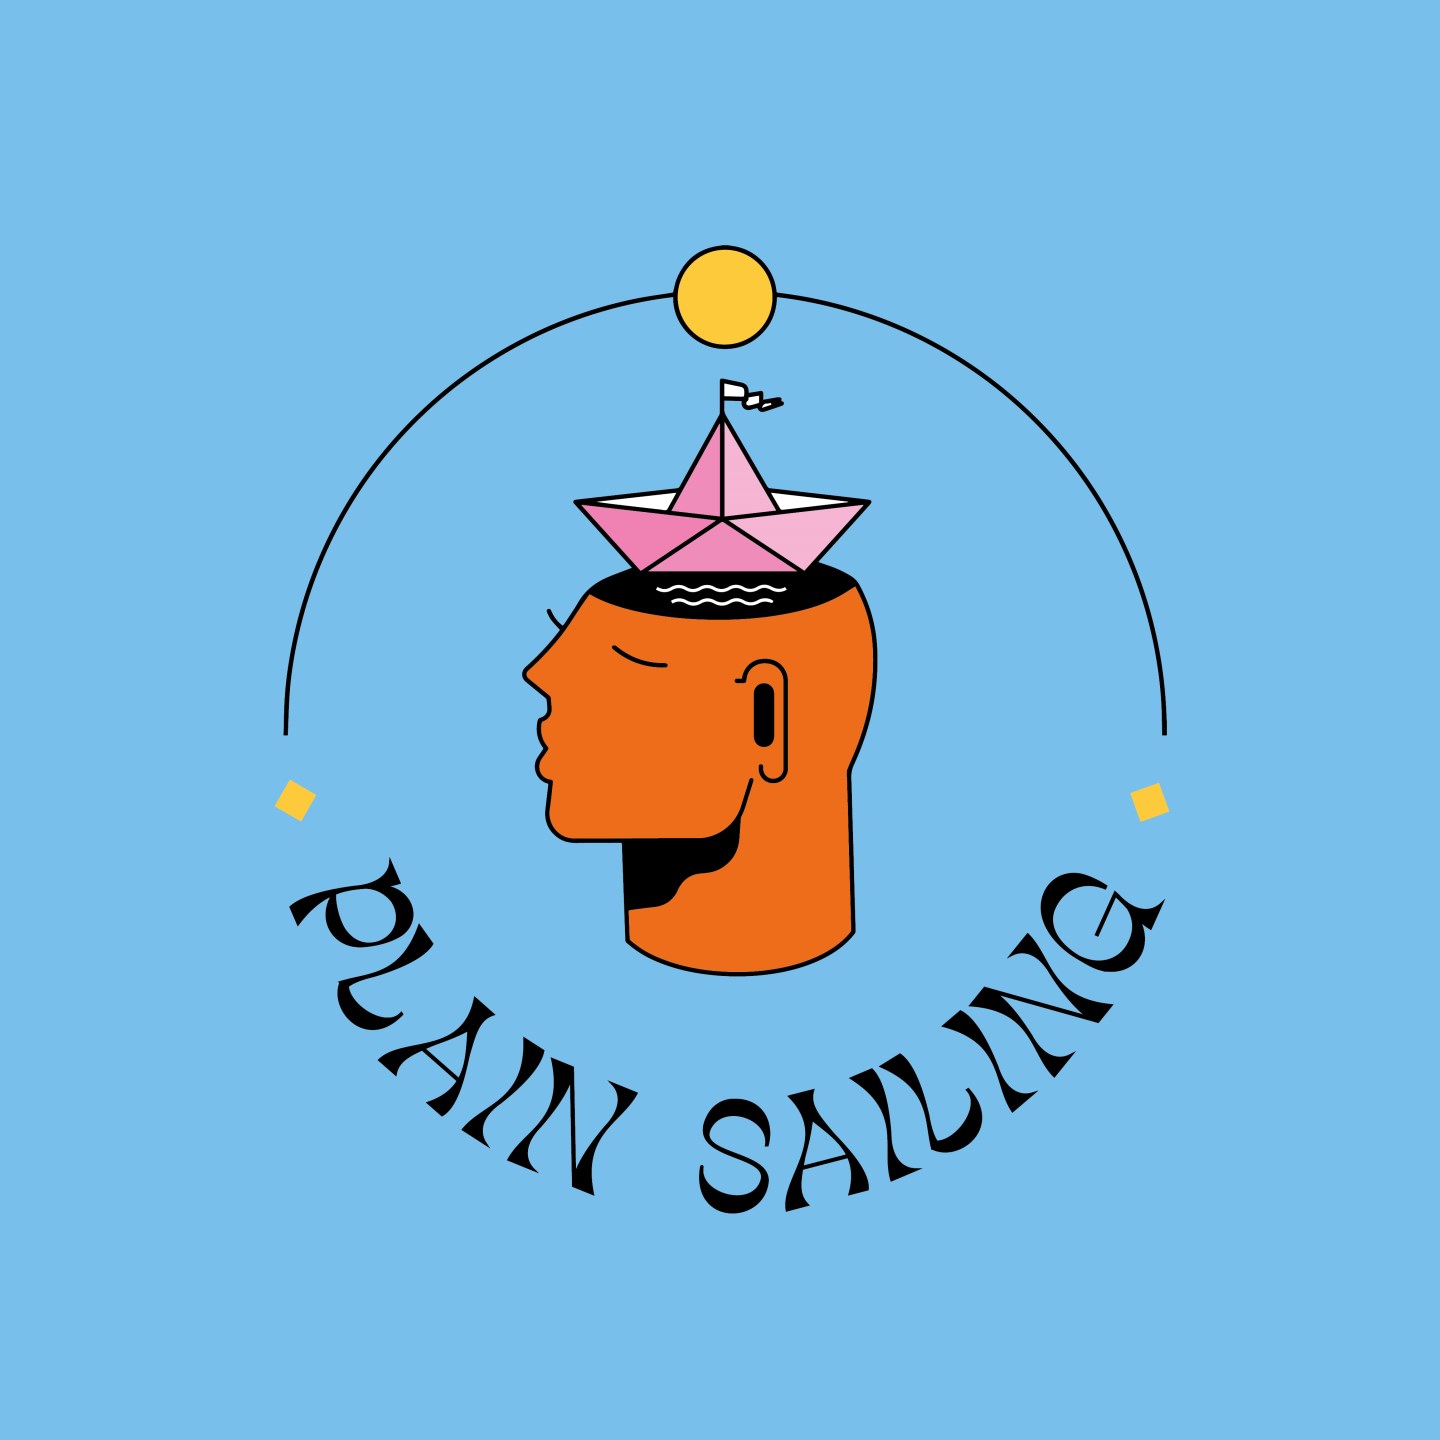 Plain Sailing · Upcoming Events, Tickets & News